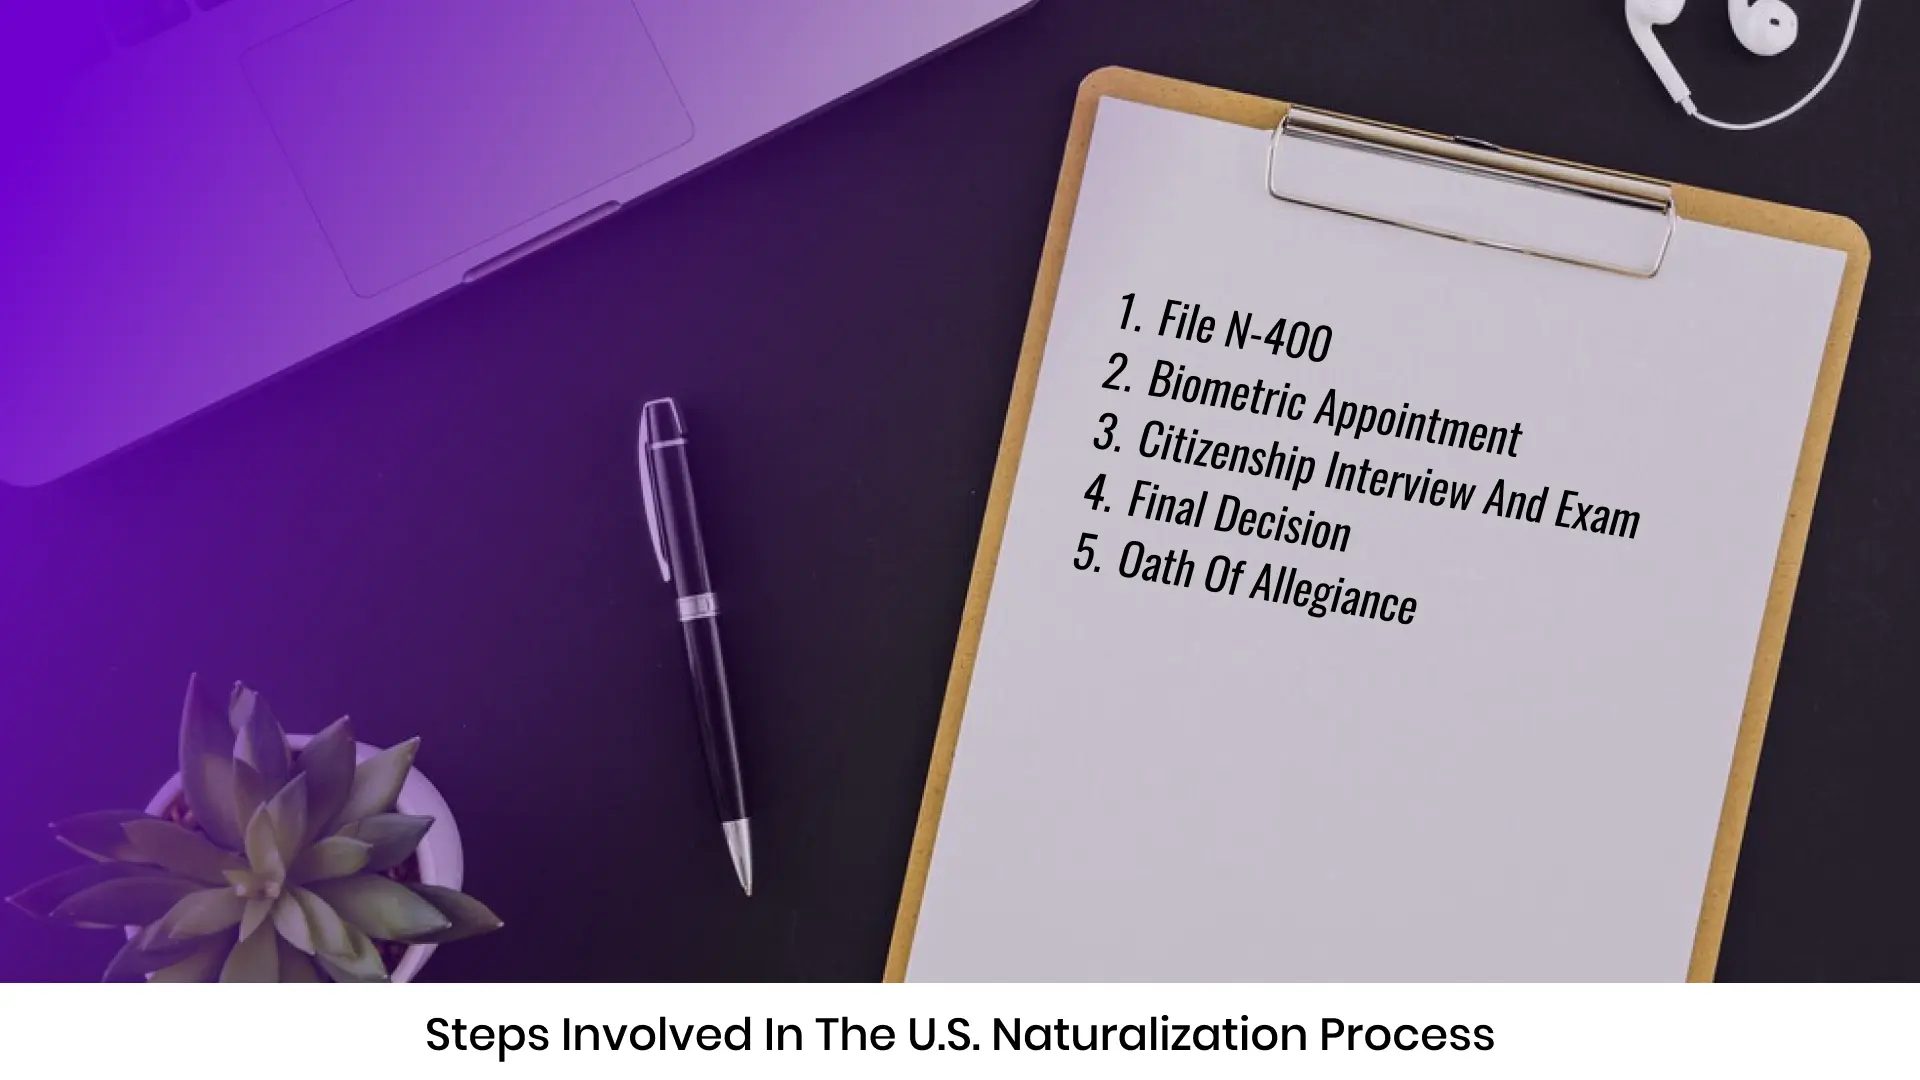 Steps Involved in the U.S. Naturalization Process